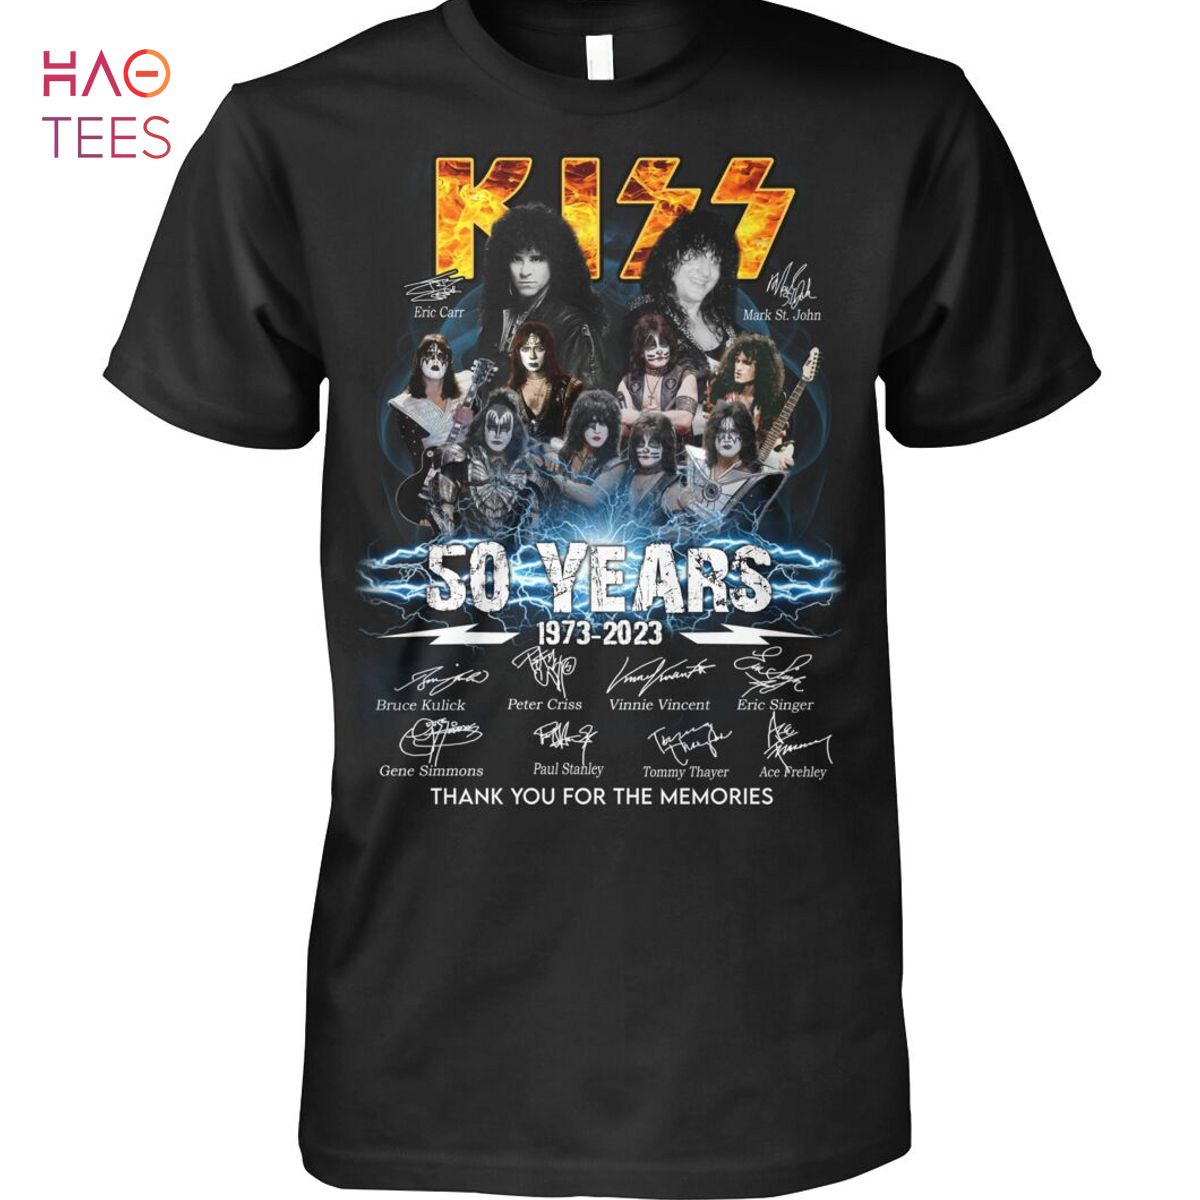 50 Years 1973-2023 Kiss Shirt Limited Edition